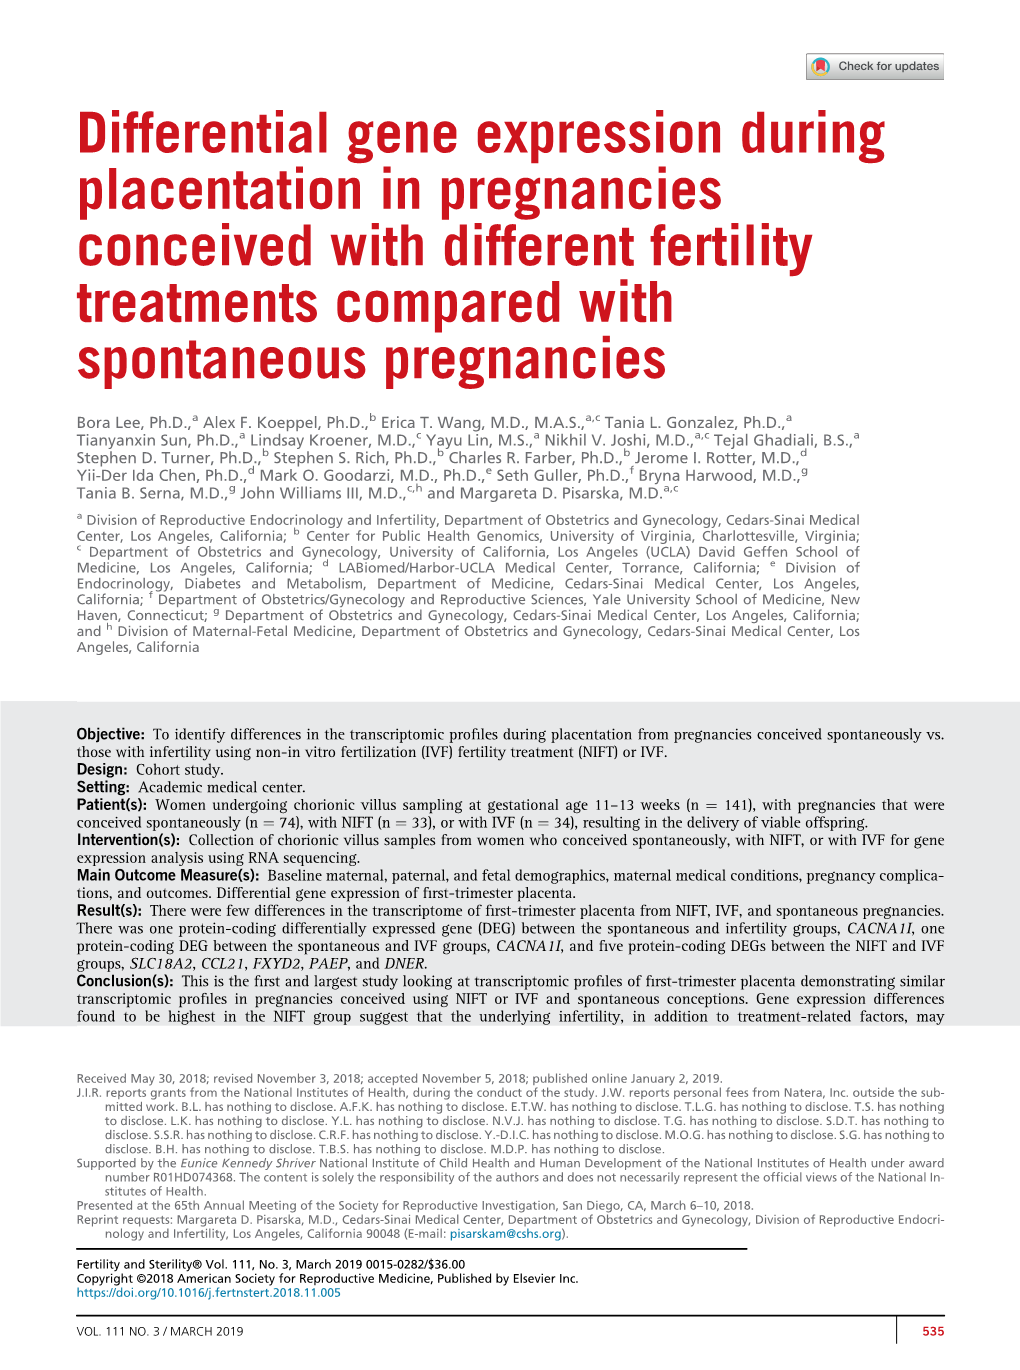 Differential Gene Expression During Placentation in Pregnancies Conceived with Different Fertility Treatments Compared with Spontaneous Pregnancies